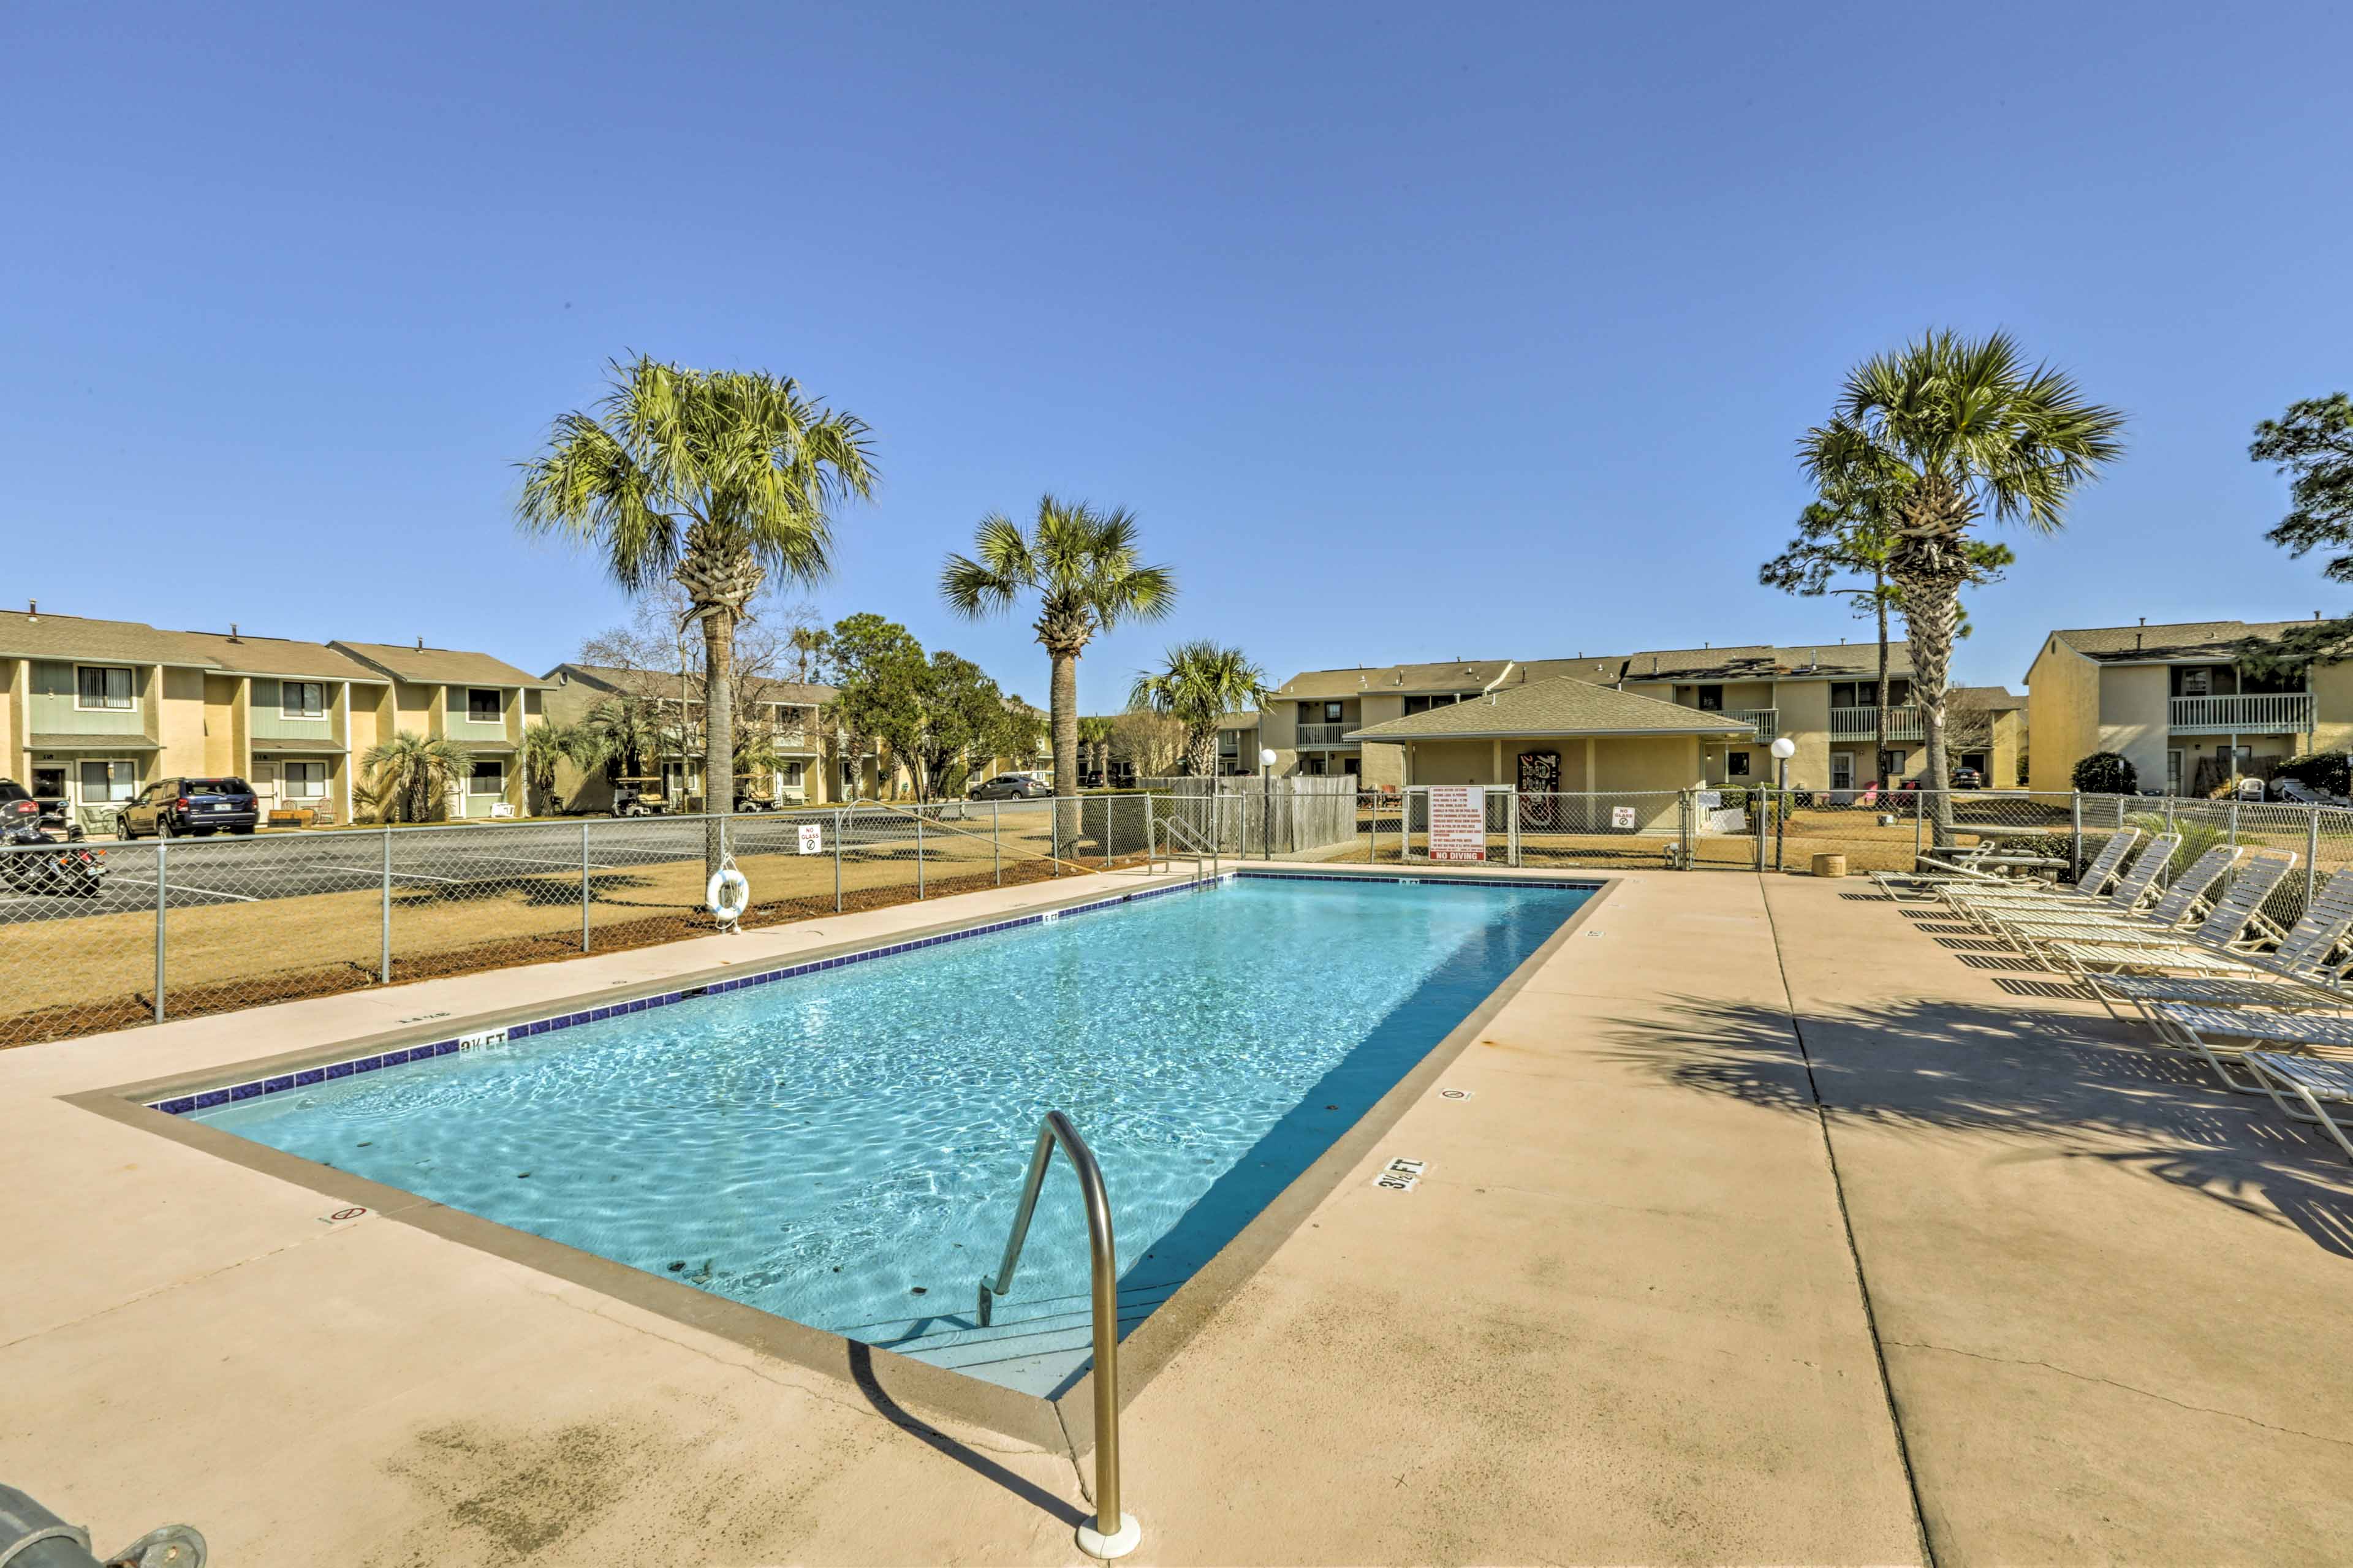 This condo offers access to 11 pools, 4 tennis courts, and a breathtaking beach.